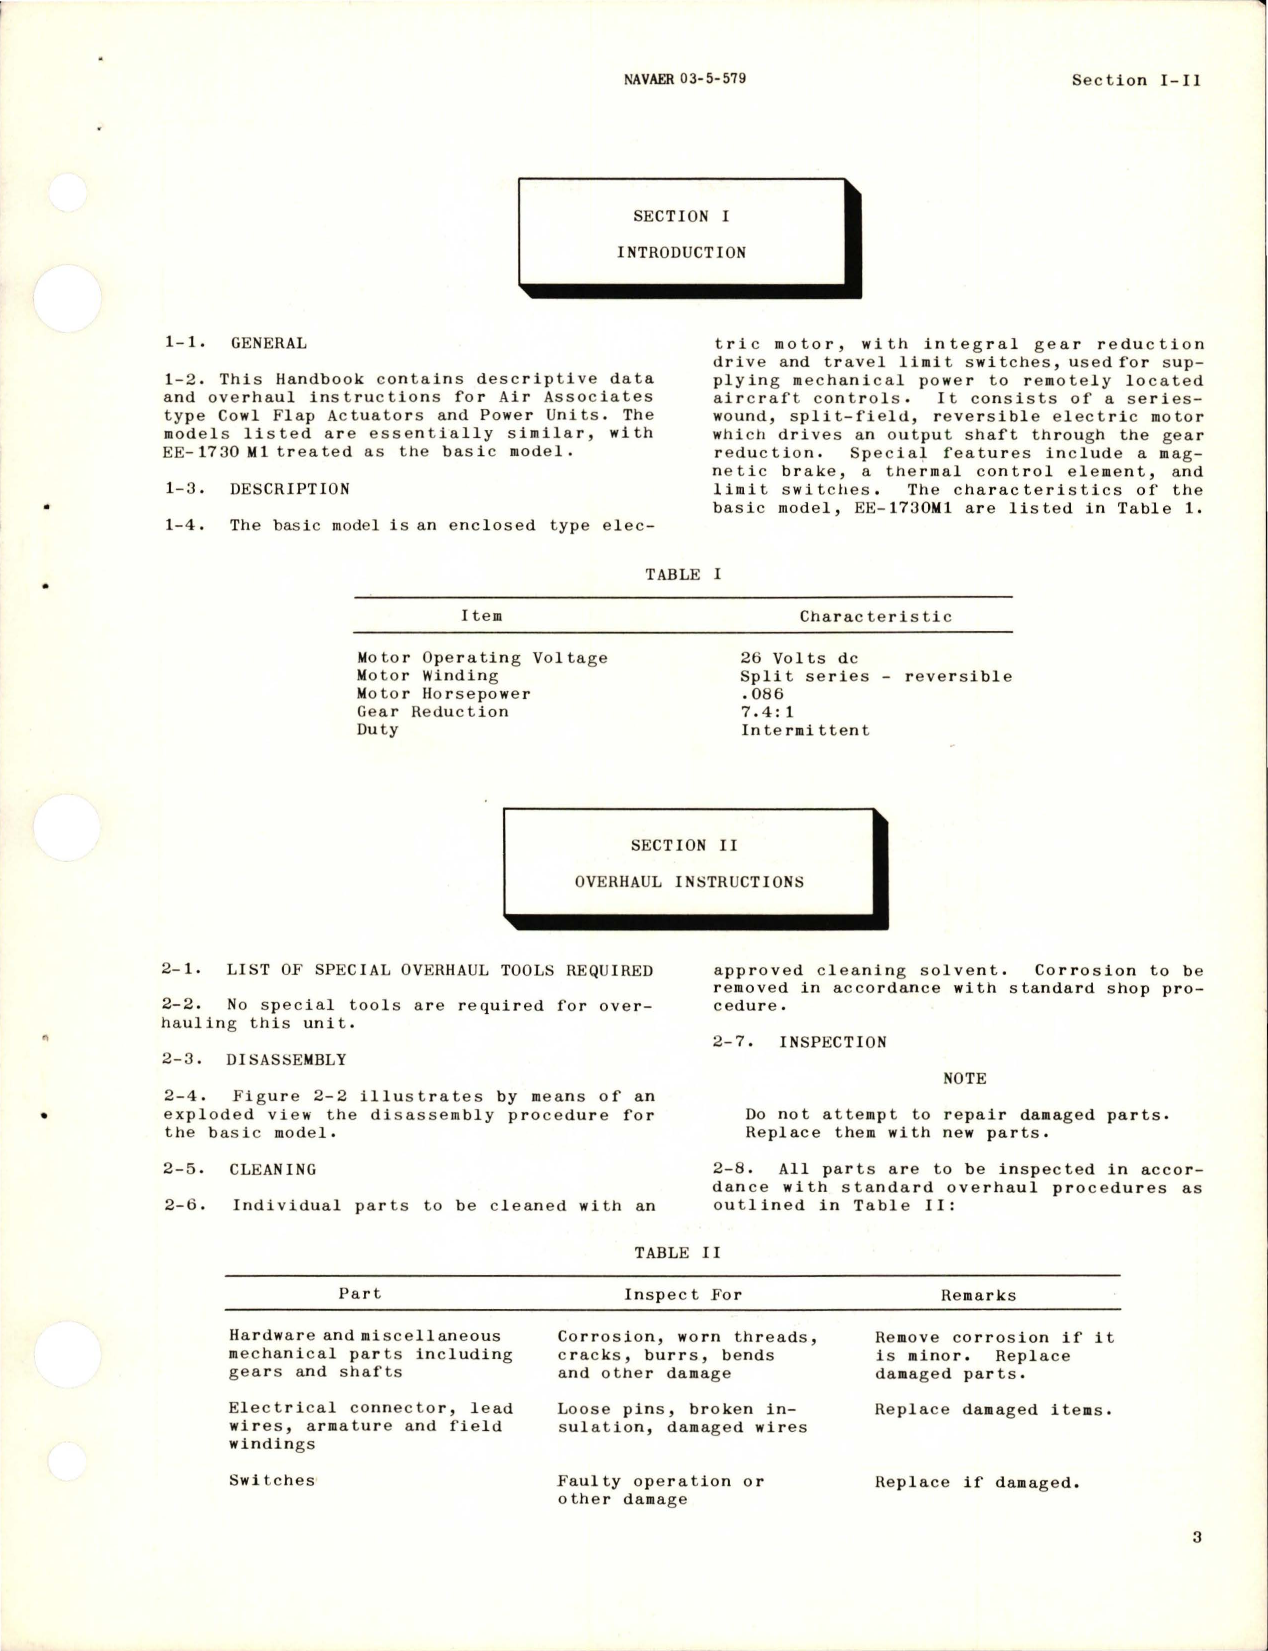 Sample page 5 from AirCorps Library document: Overhaul Instructions for Cowl Flap Actuators and Power Unit